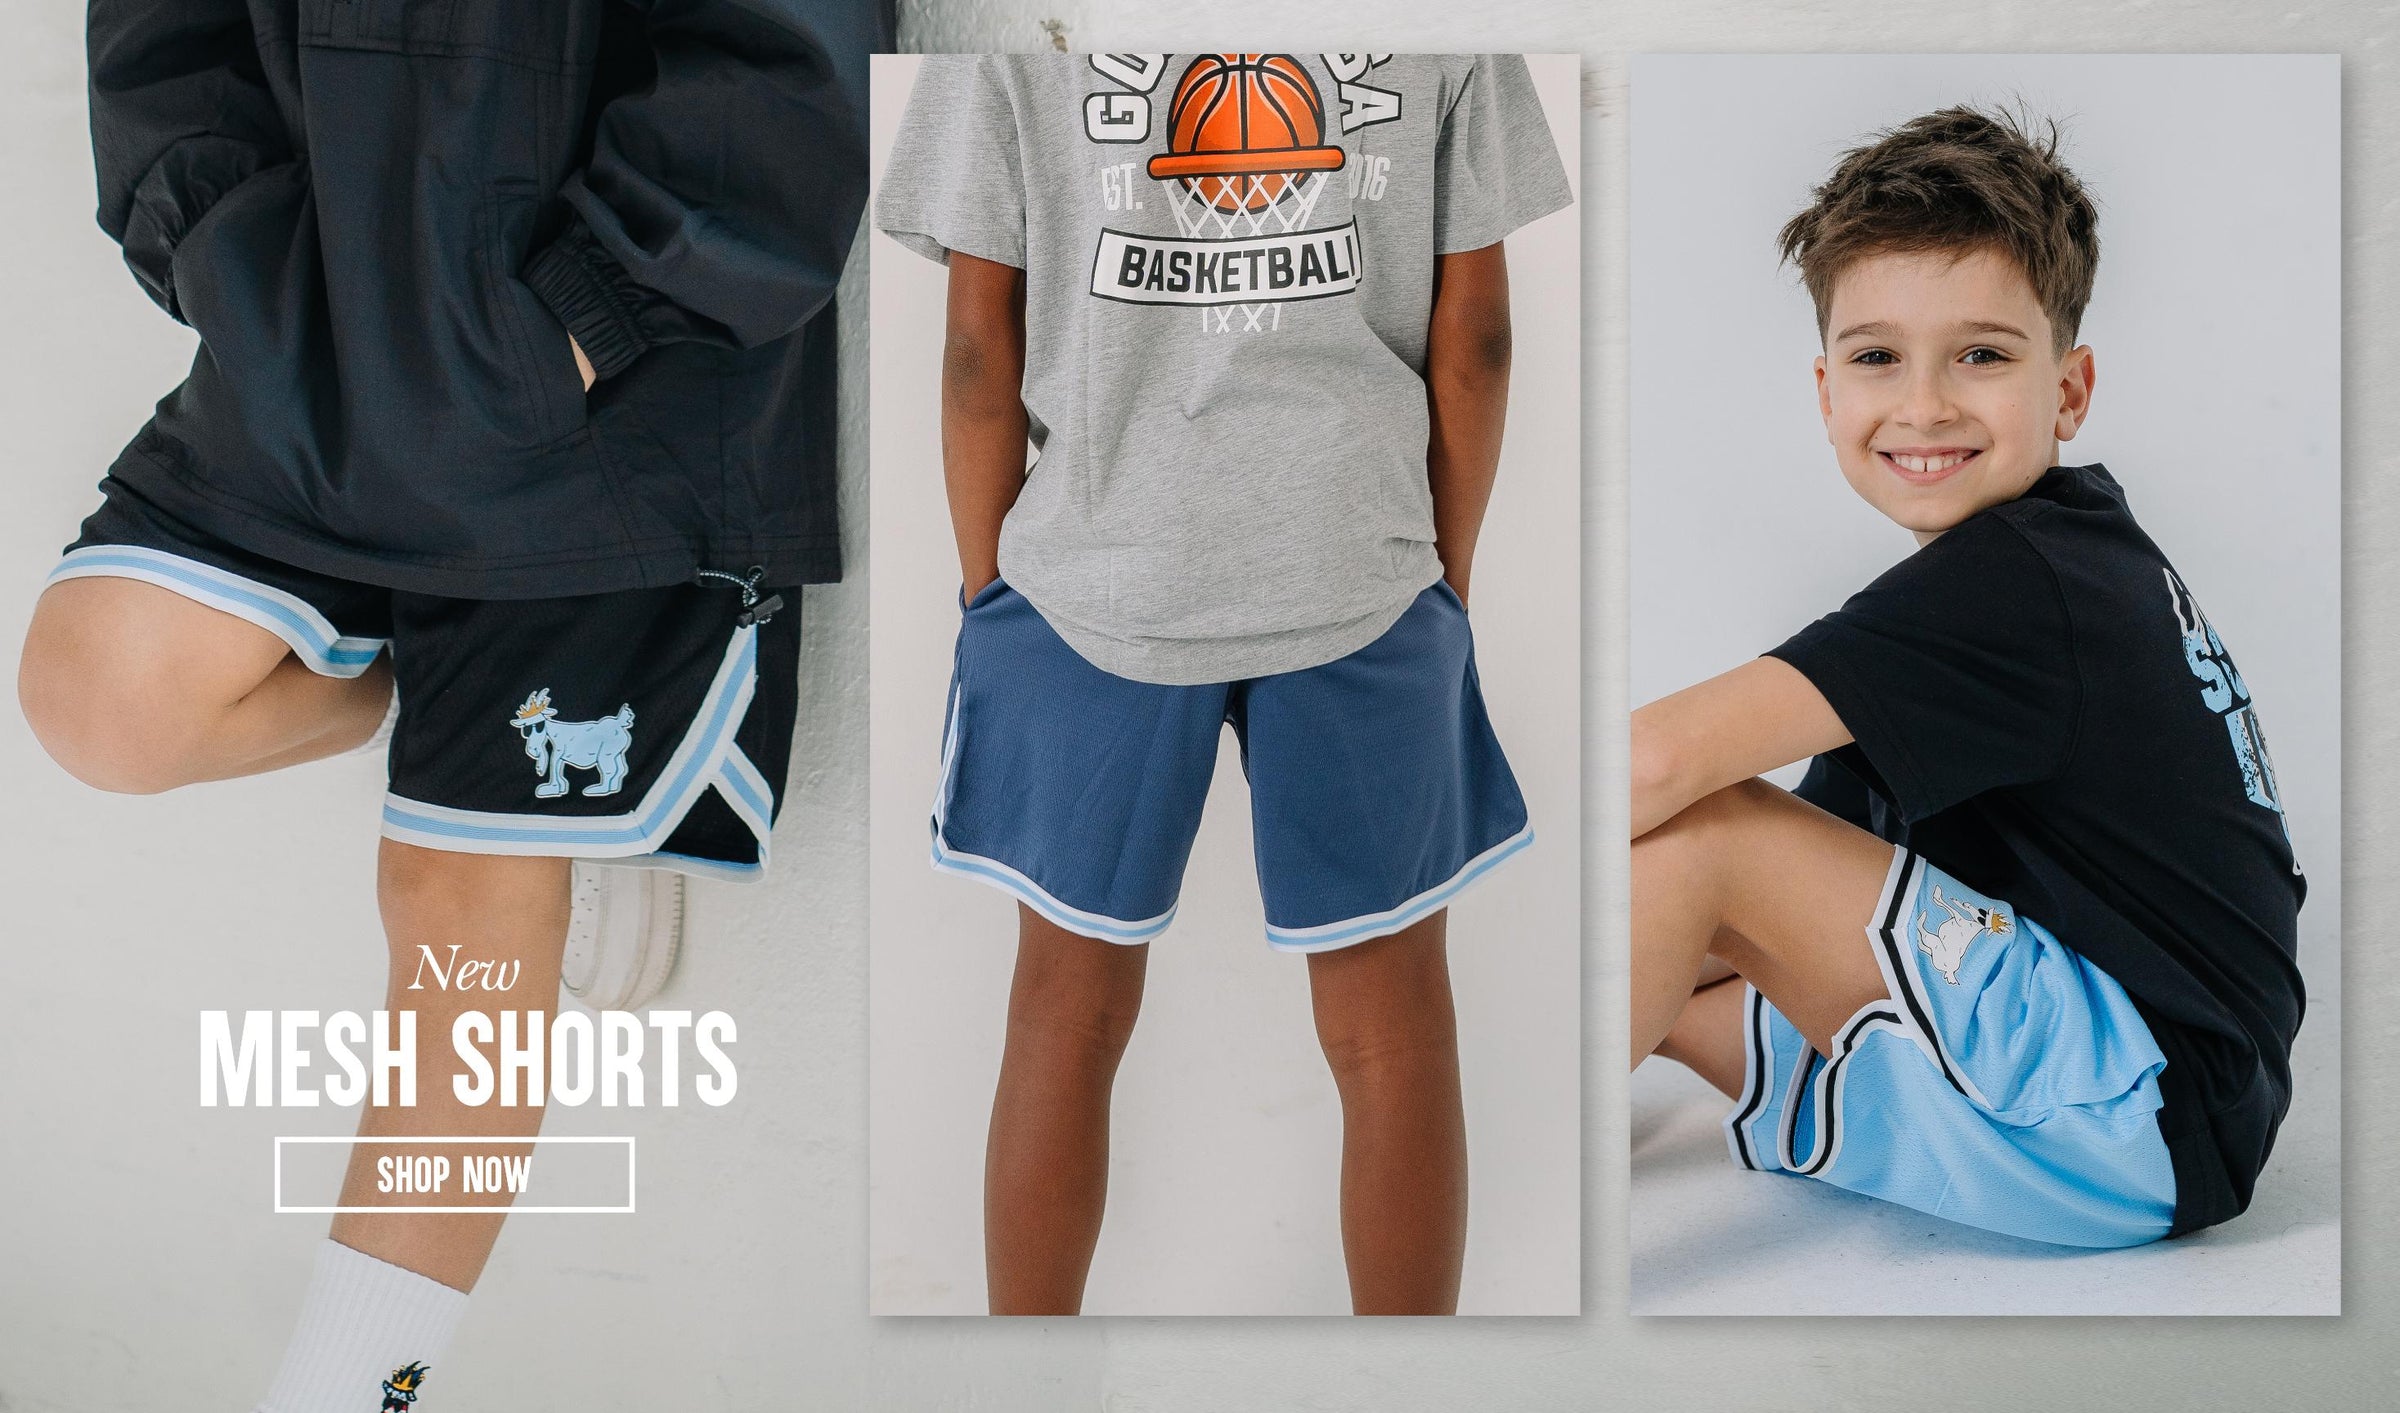 Various images of boys in shorts with text that reads "New Mesh Shorts Shop Now"